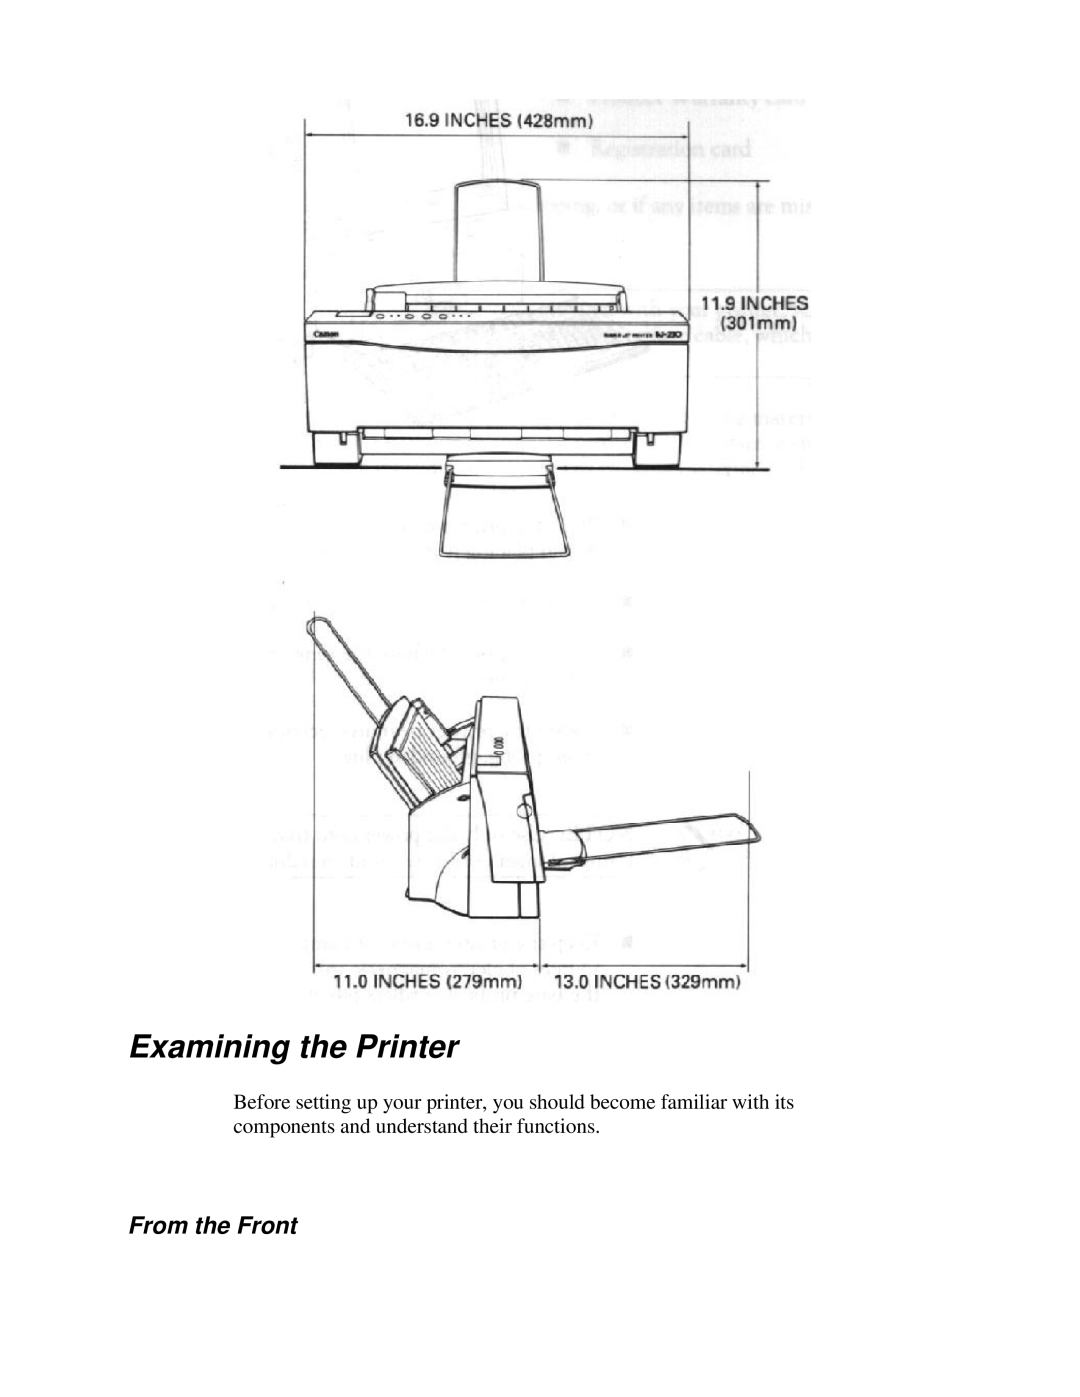 Canon BJ-230 user manual Examining the Printer, From the Front 